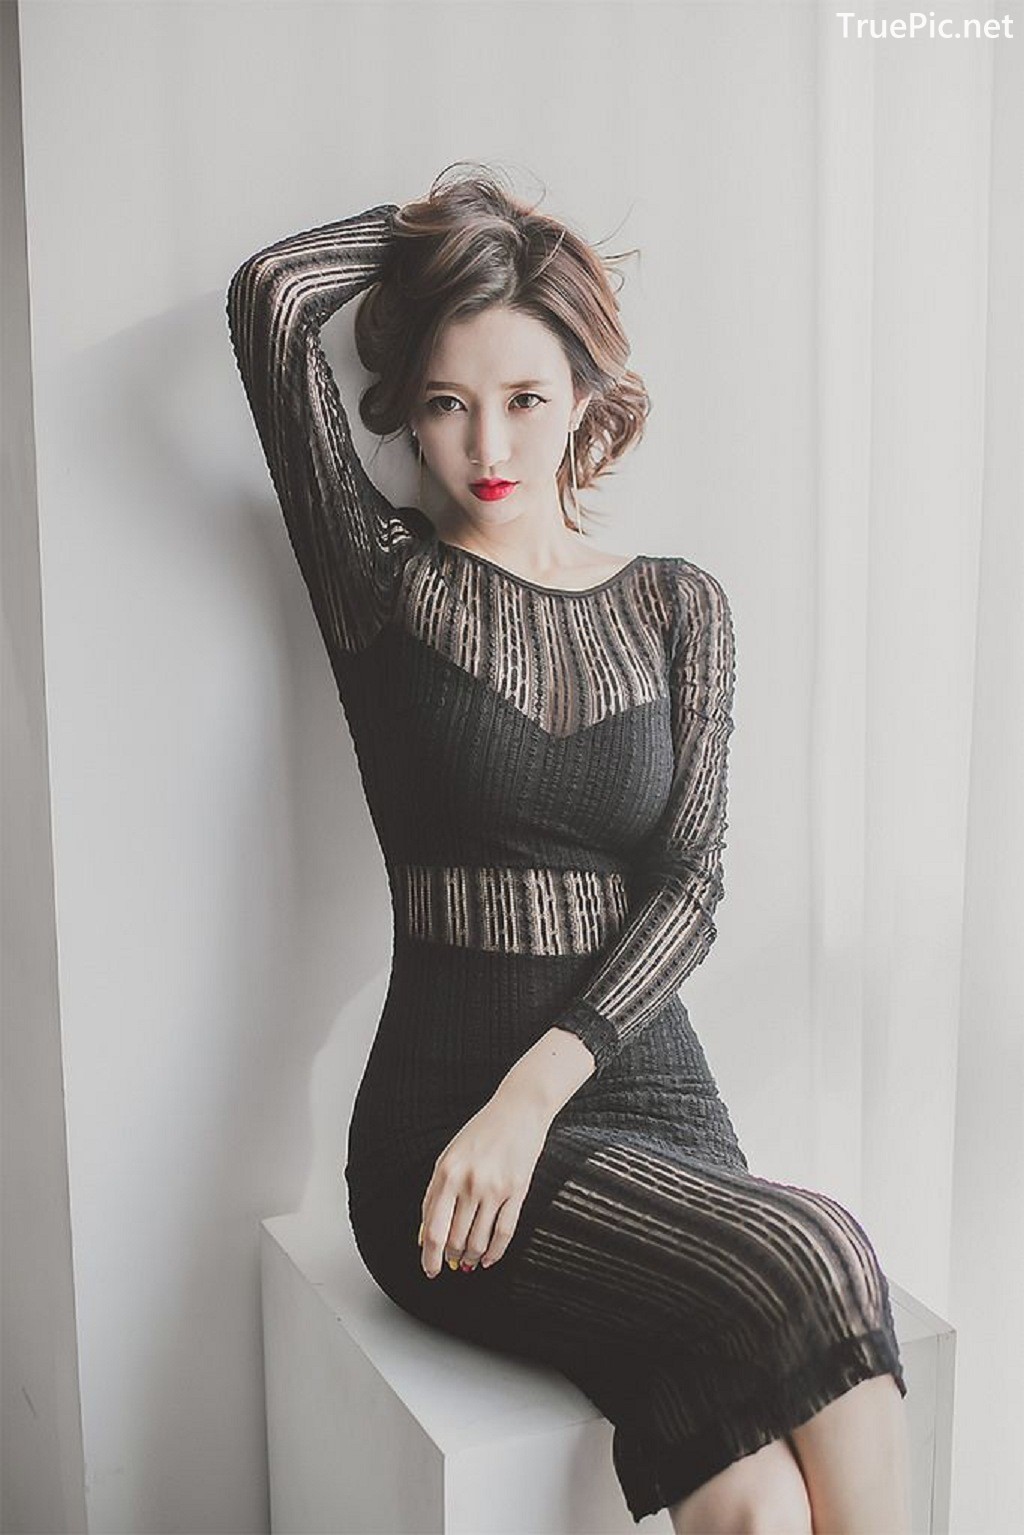 Image-Lee-Yeon-Jeong-Indoor-Photoshoot-Collection-Korean-fashion-model-Part-14-TruePic.net- Picture-50